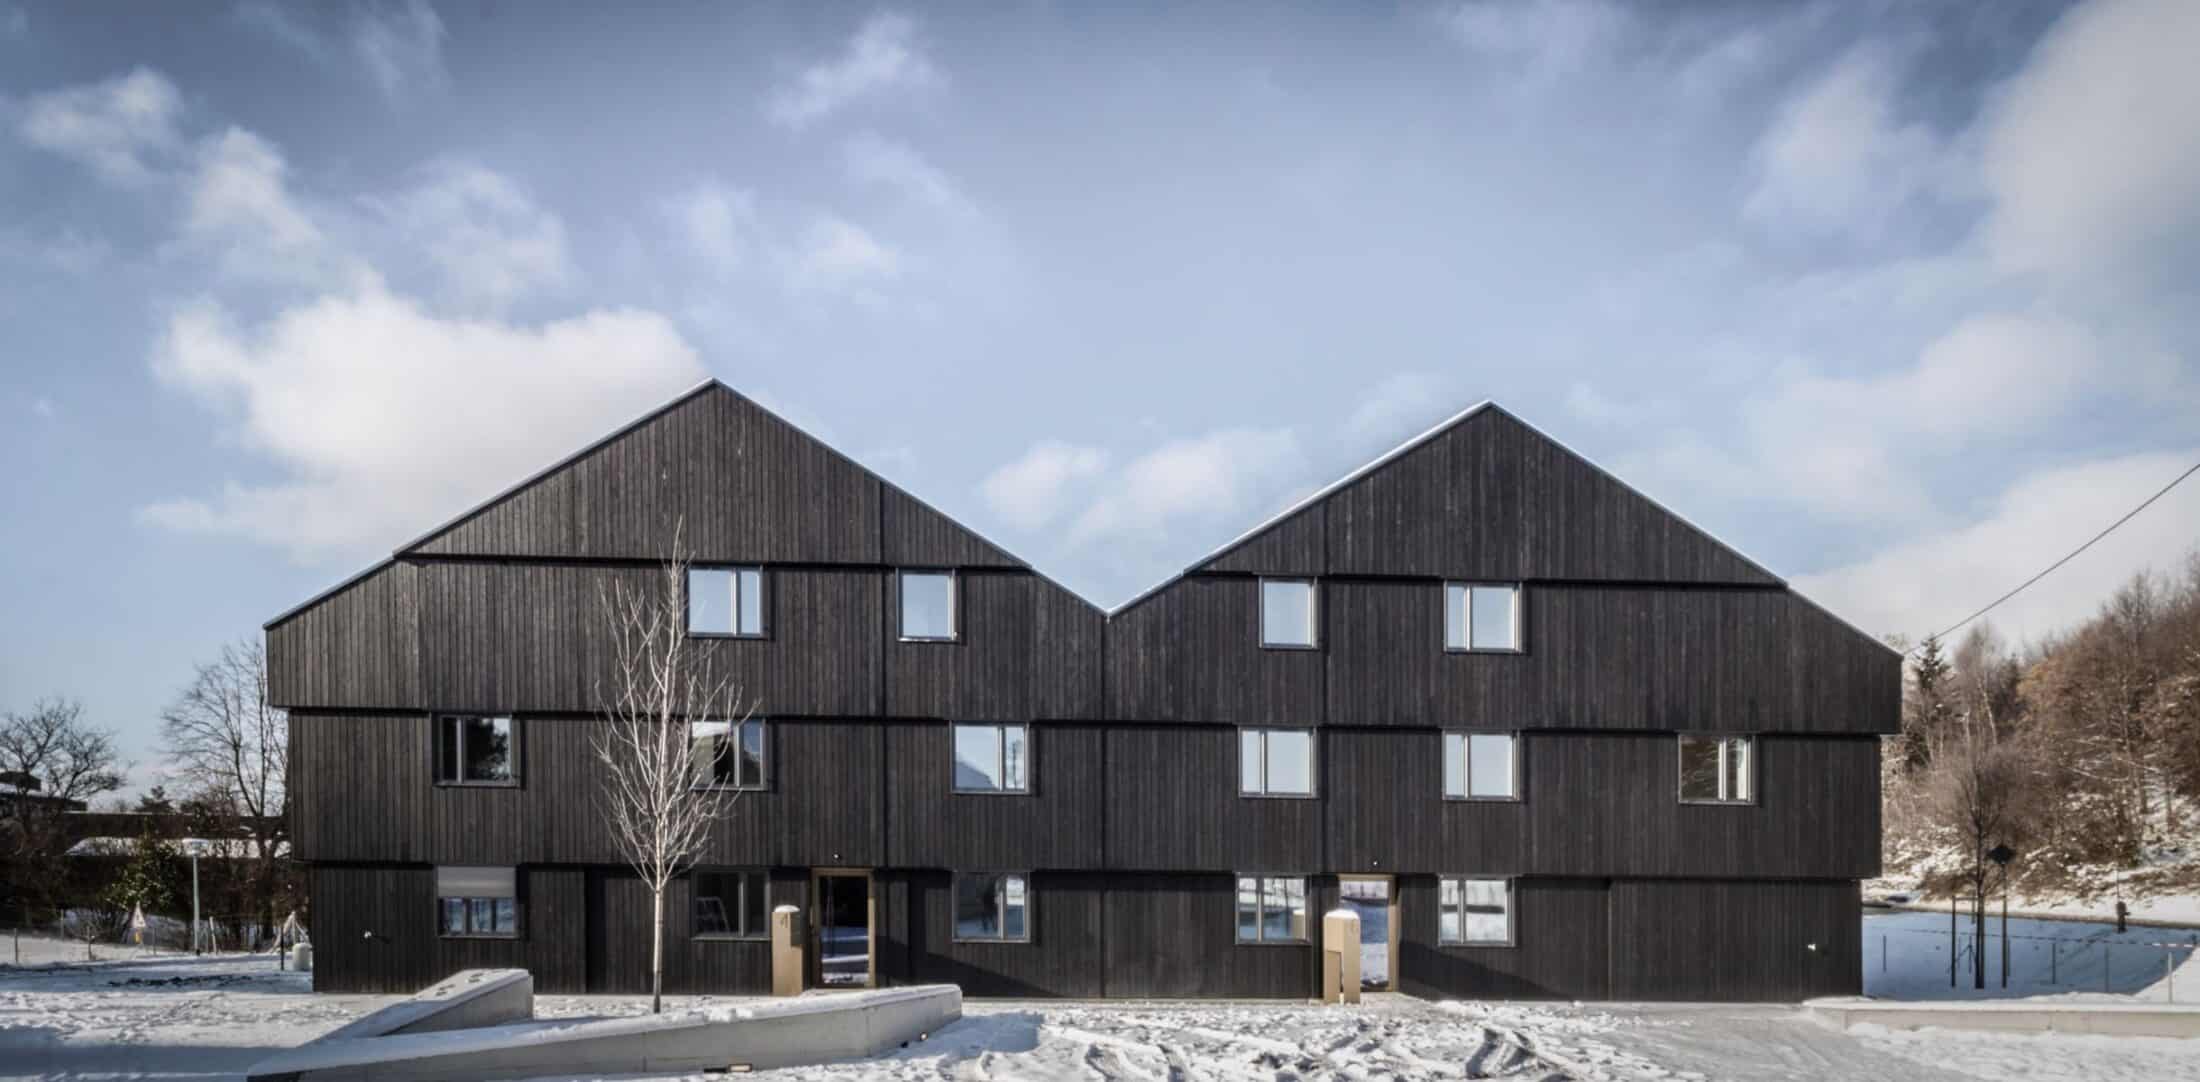 Building with 12 apartments in Switzerland